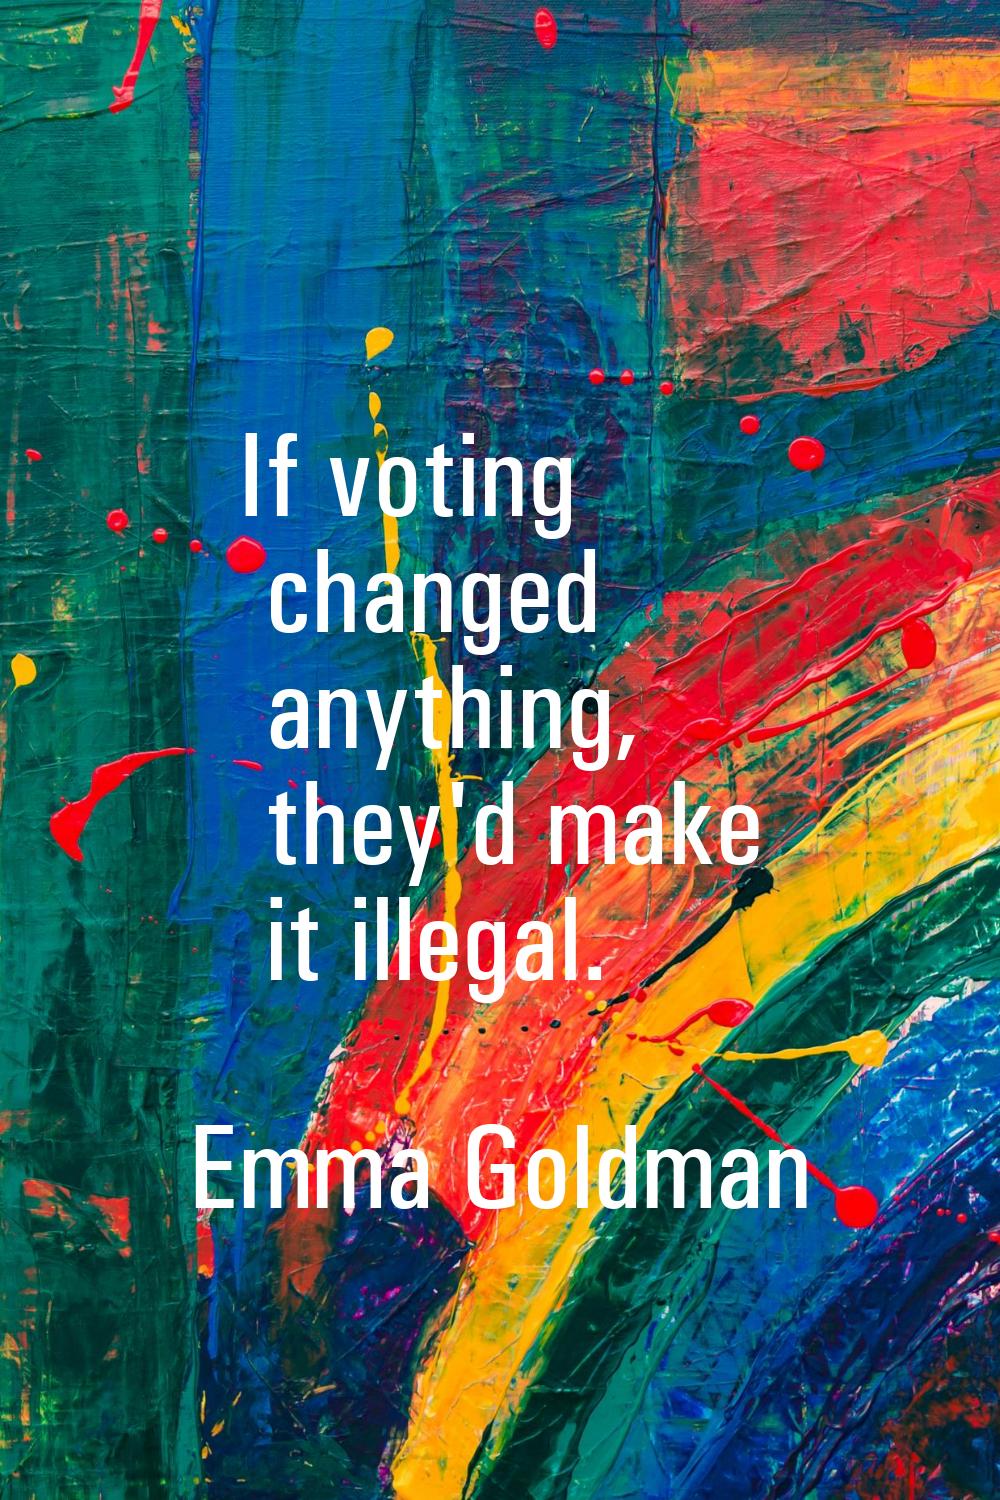 If voting changed anything, they'd make it illegal.